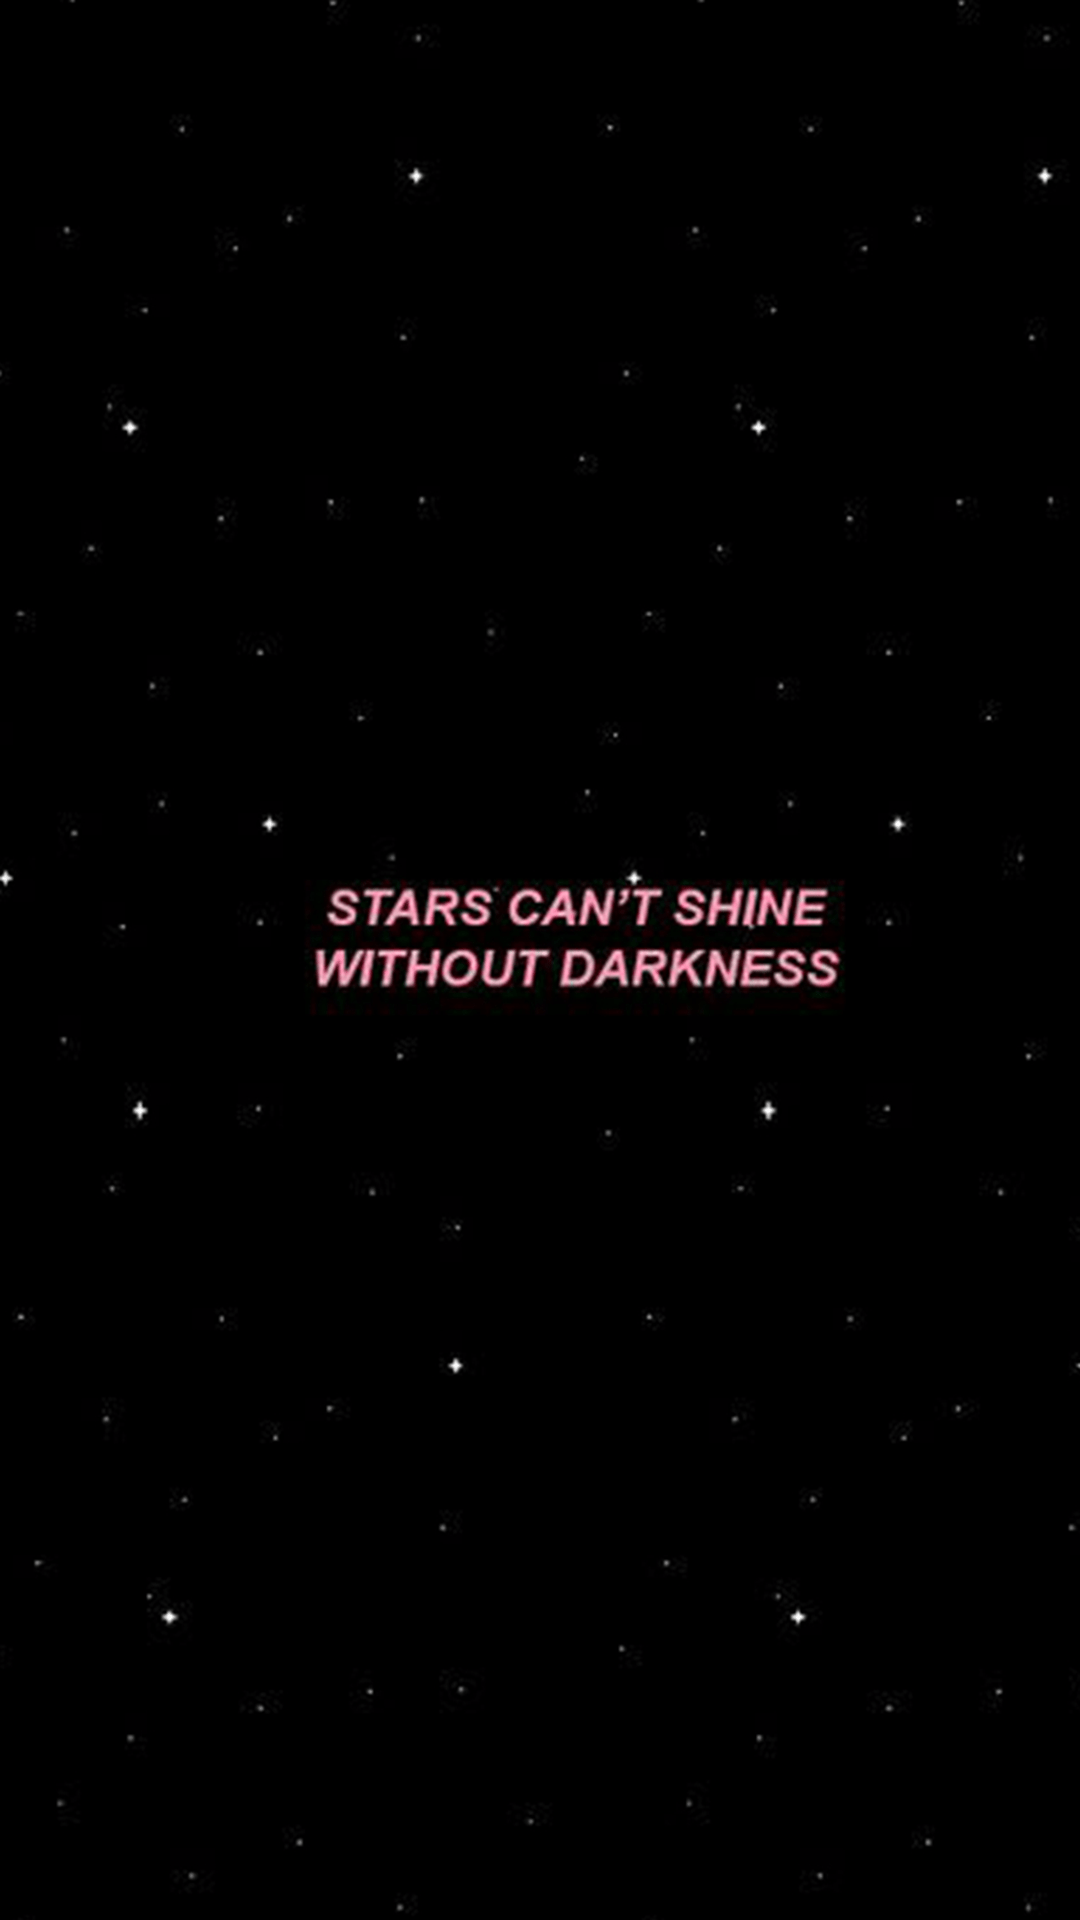 Stars cant shine without darkness - Cute iPhone